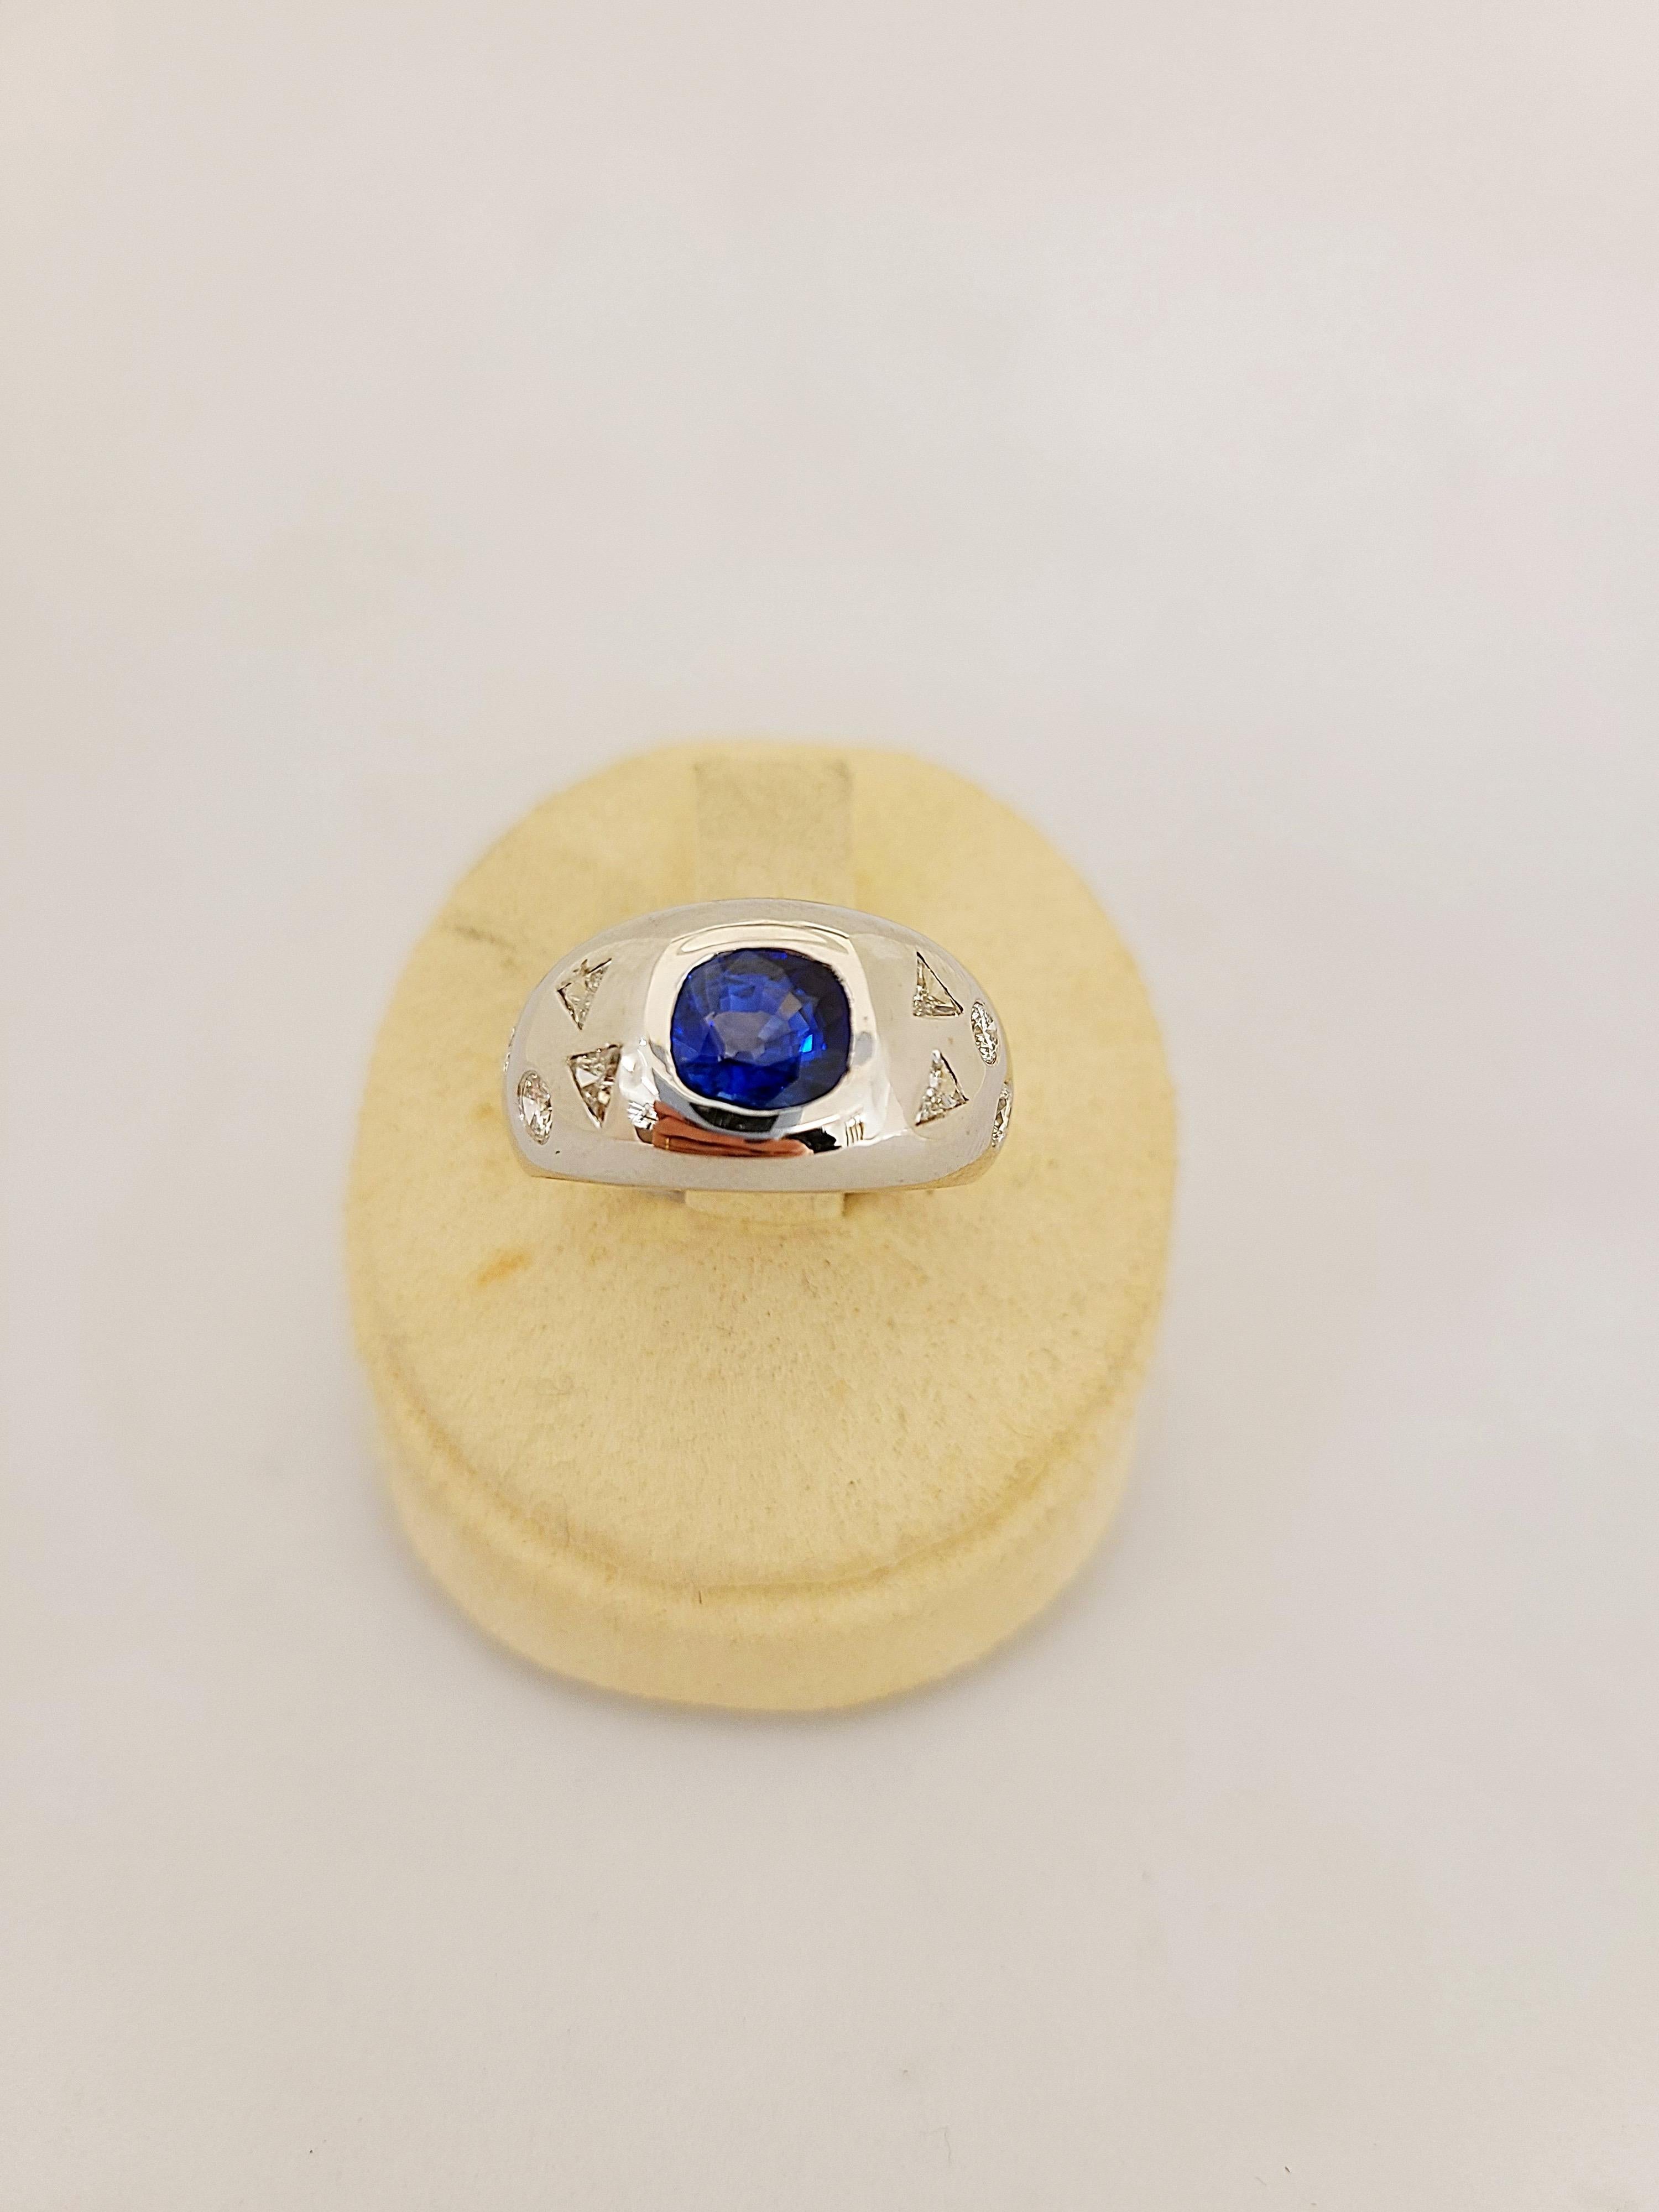 Contemporary 18 Karat WG Gypsy Ring with 1.82 Carat Sapphire and Fancy Shaped Diamonds For Sale